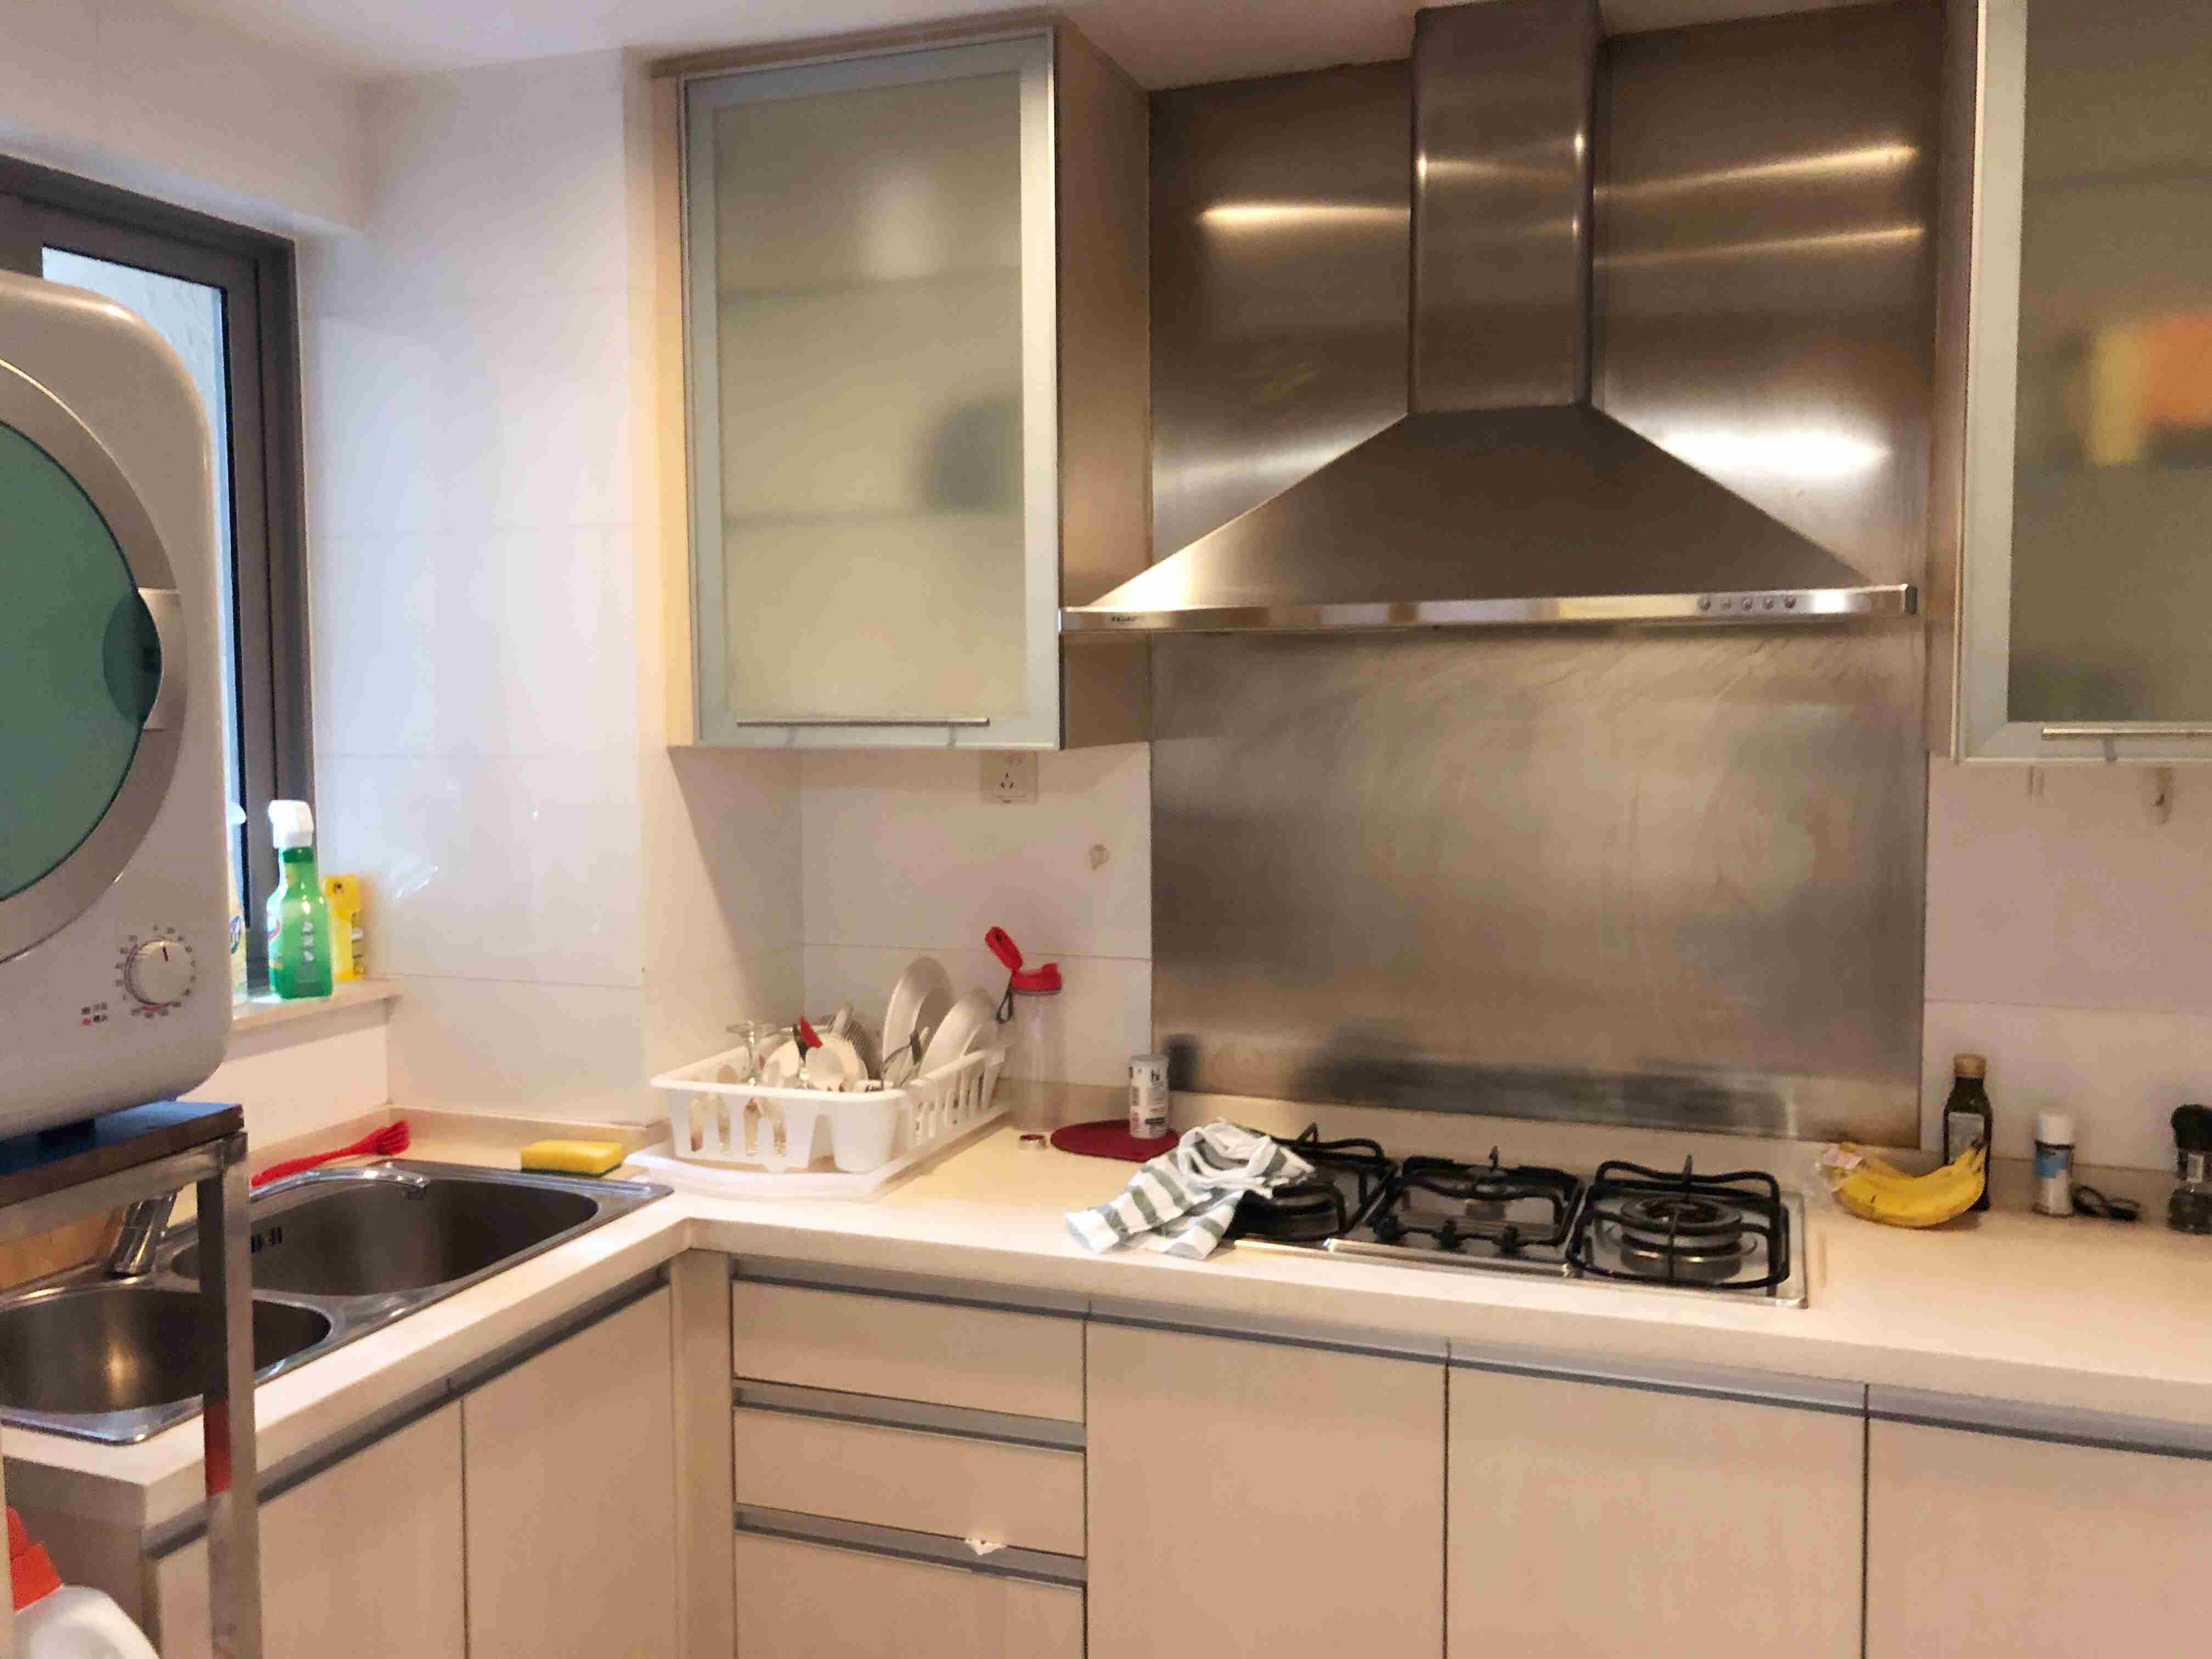 clean kitchen Spacious 1BR La Cite Apt w Private Patio Nr Ln 1/9/11 for Rent in Shanghai